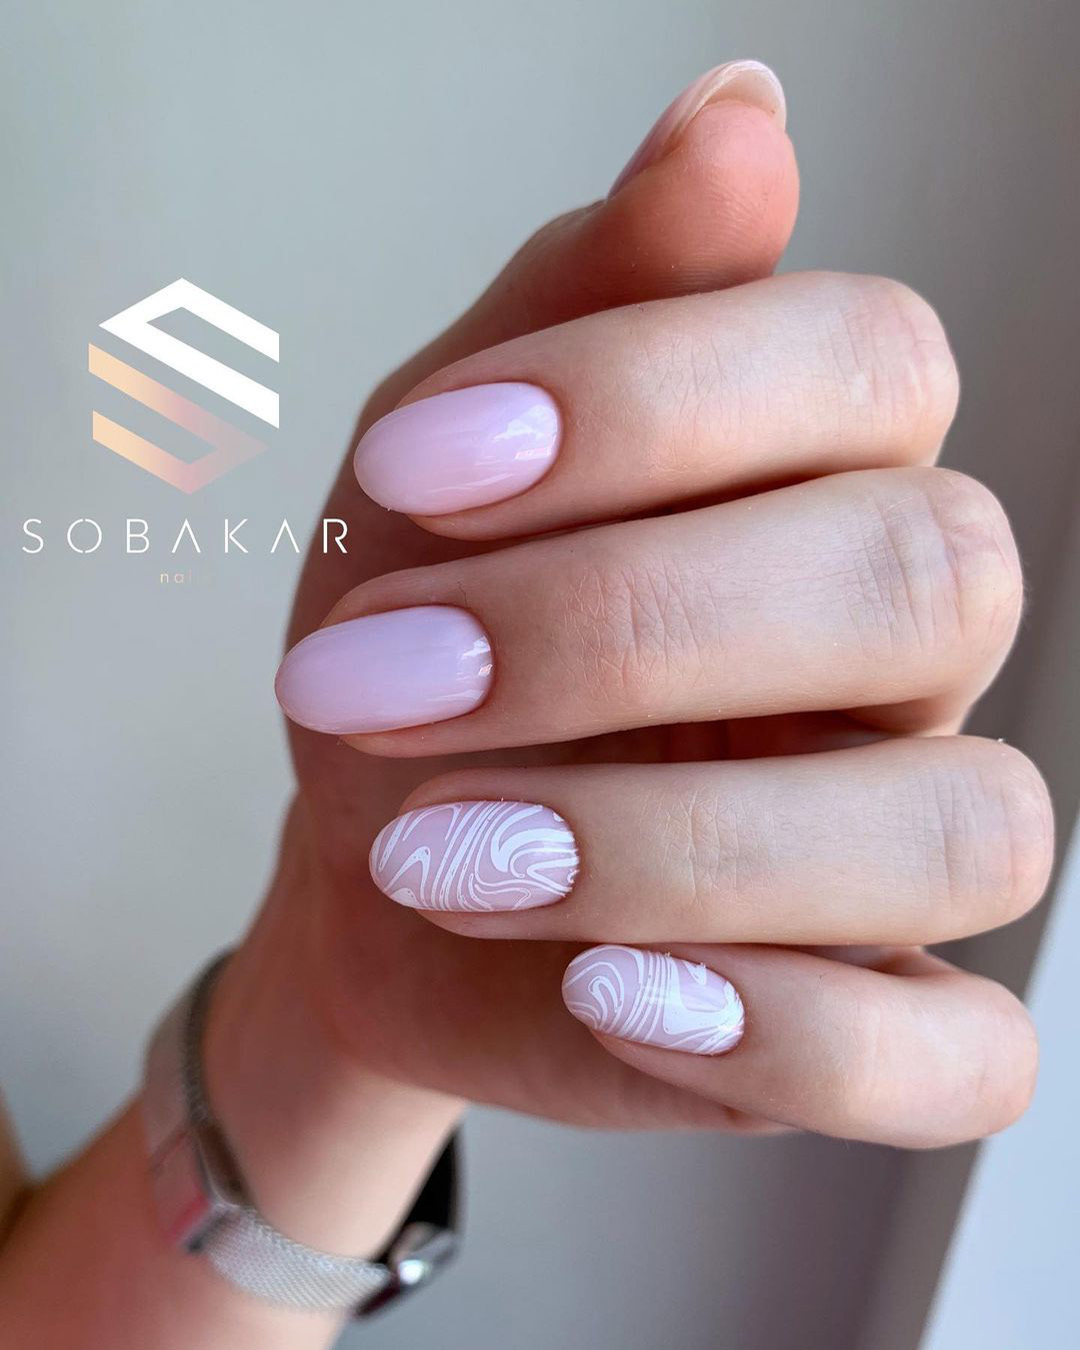 simple wedding nails light pink and white abstract sobakar_nails